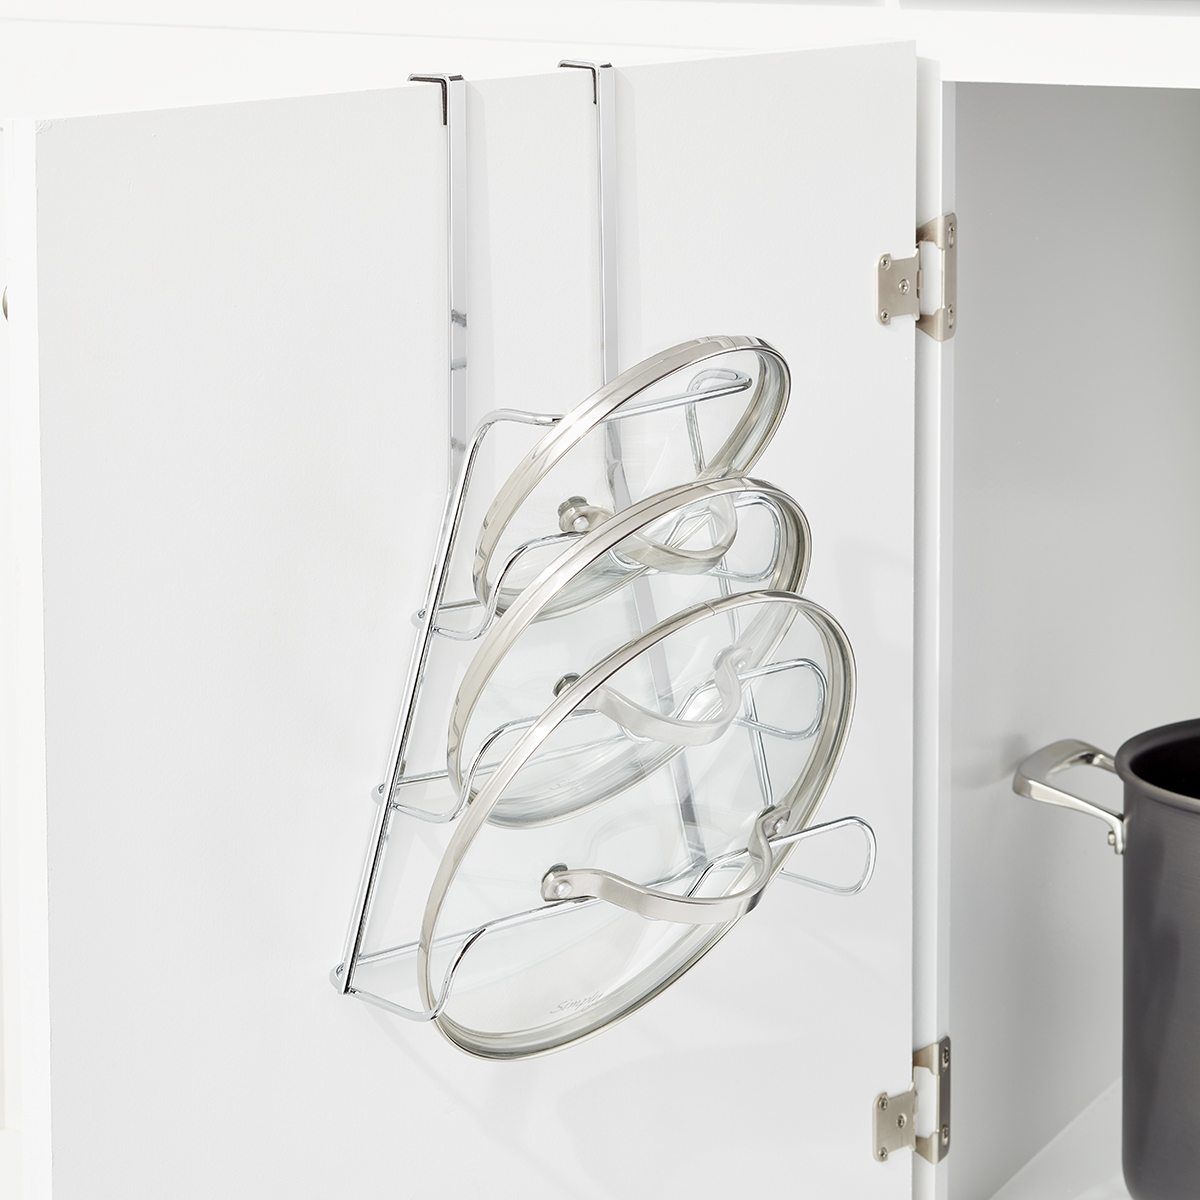 https://www.containerstore.com/catalogimages/419562/10077022_Overcabinet_LidHolder-Chrom.jpg